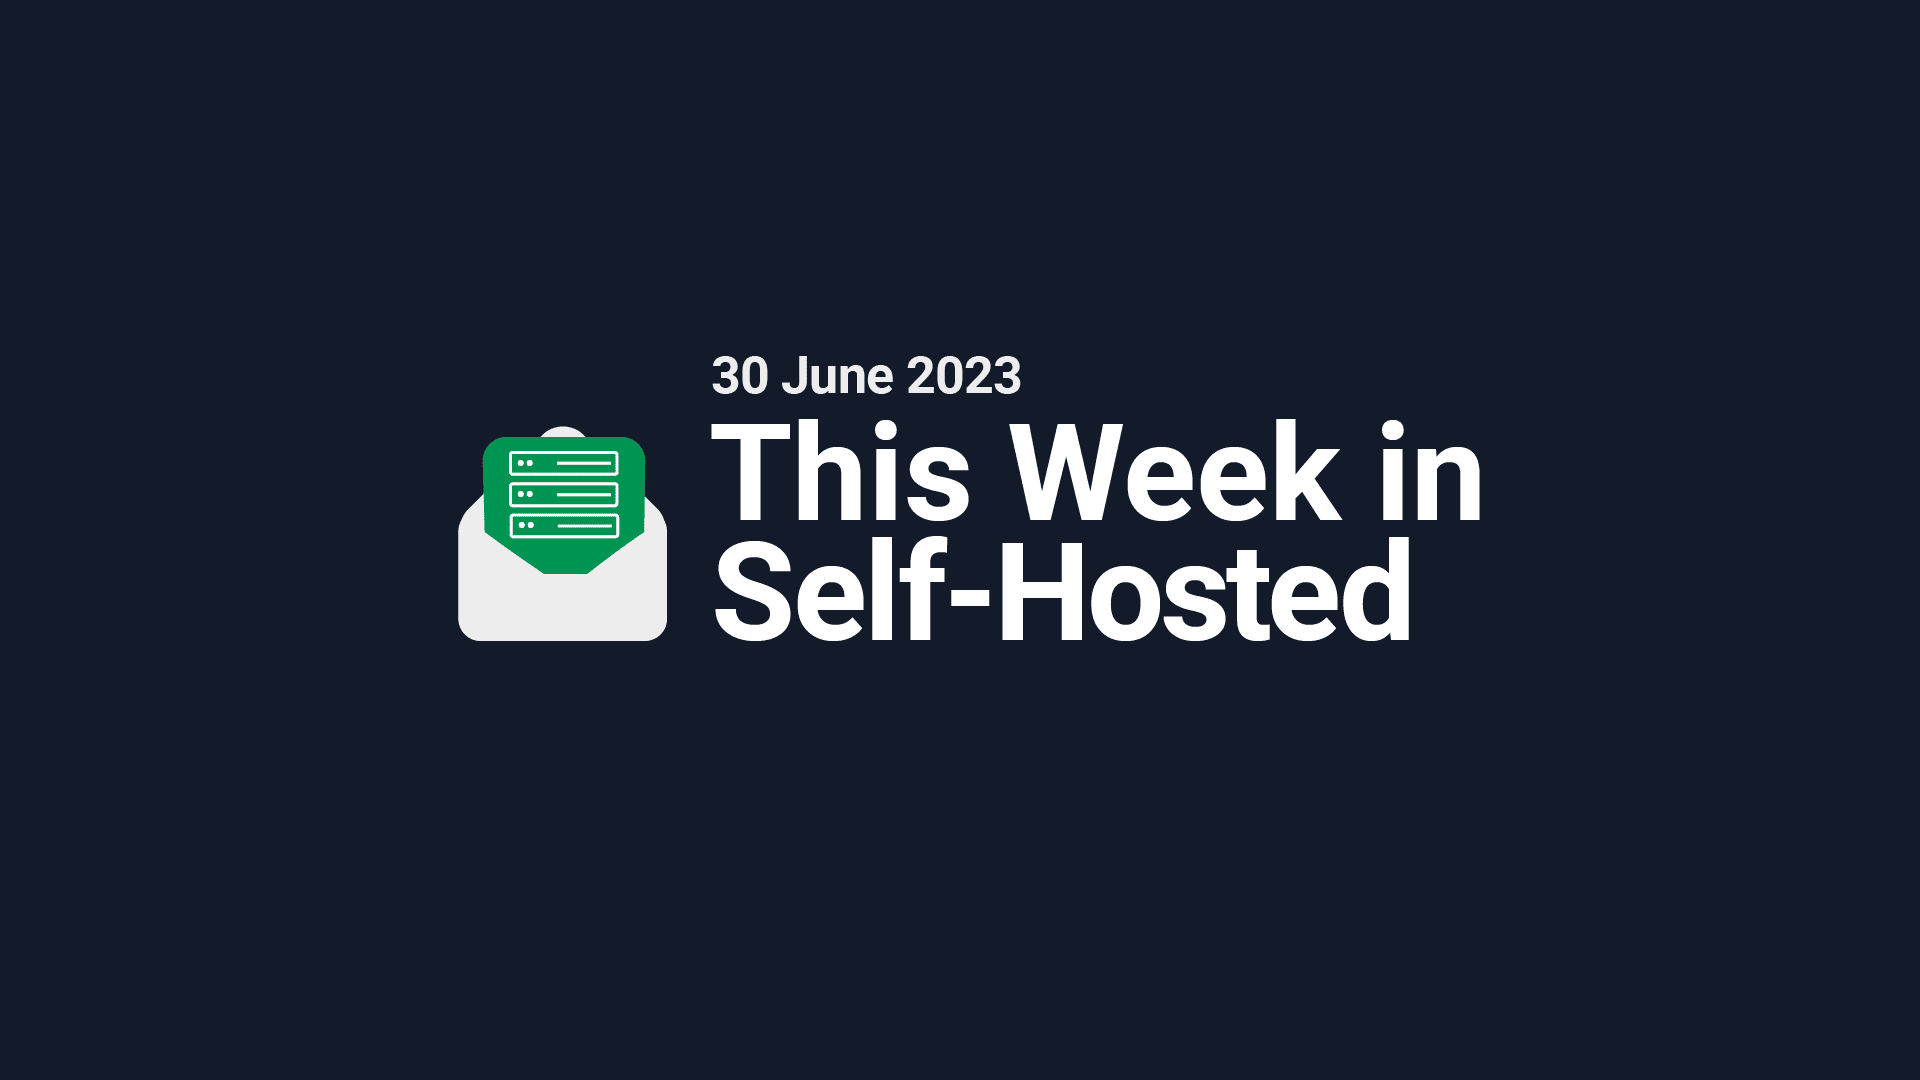 This Week in Self-Hosted (30 June 2023) Post image